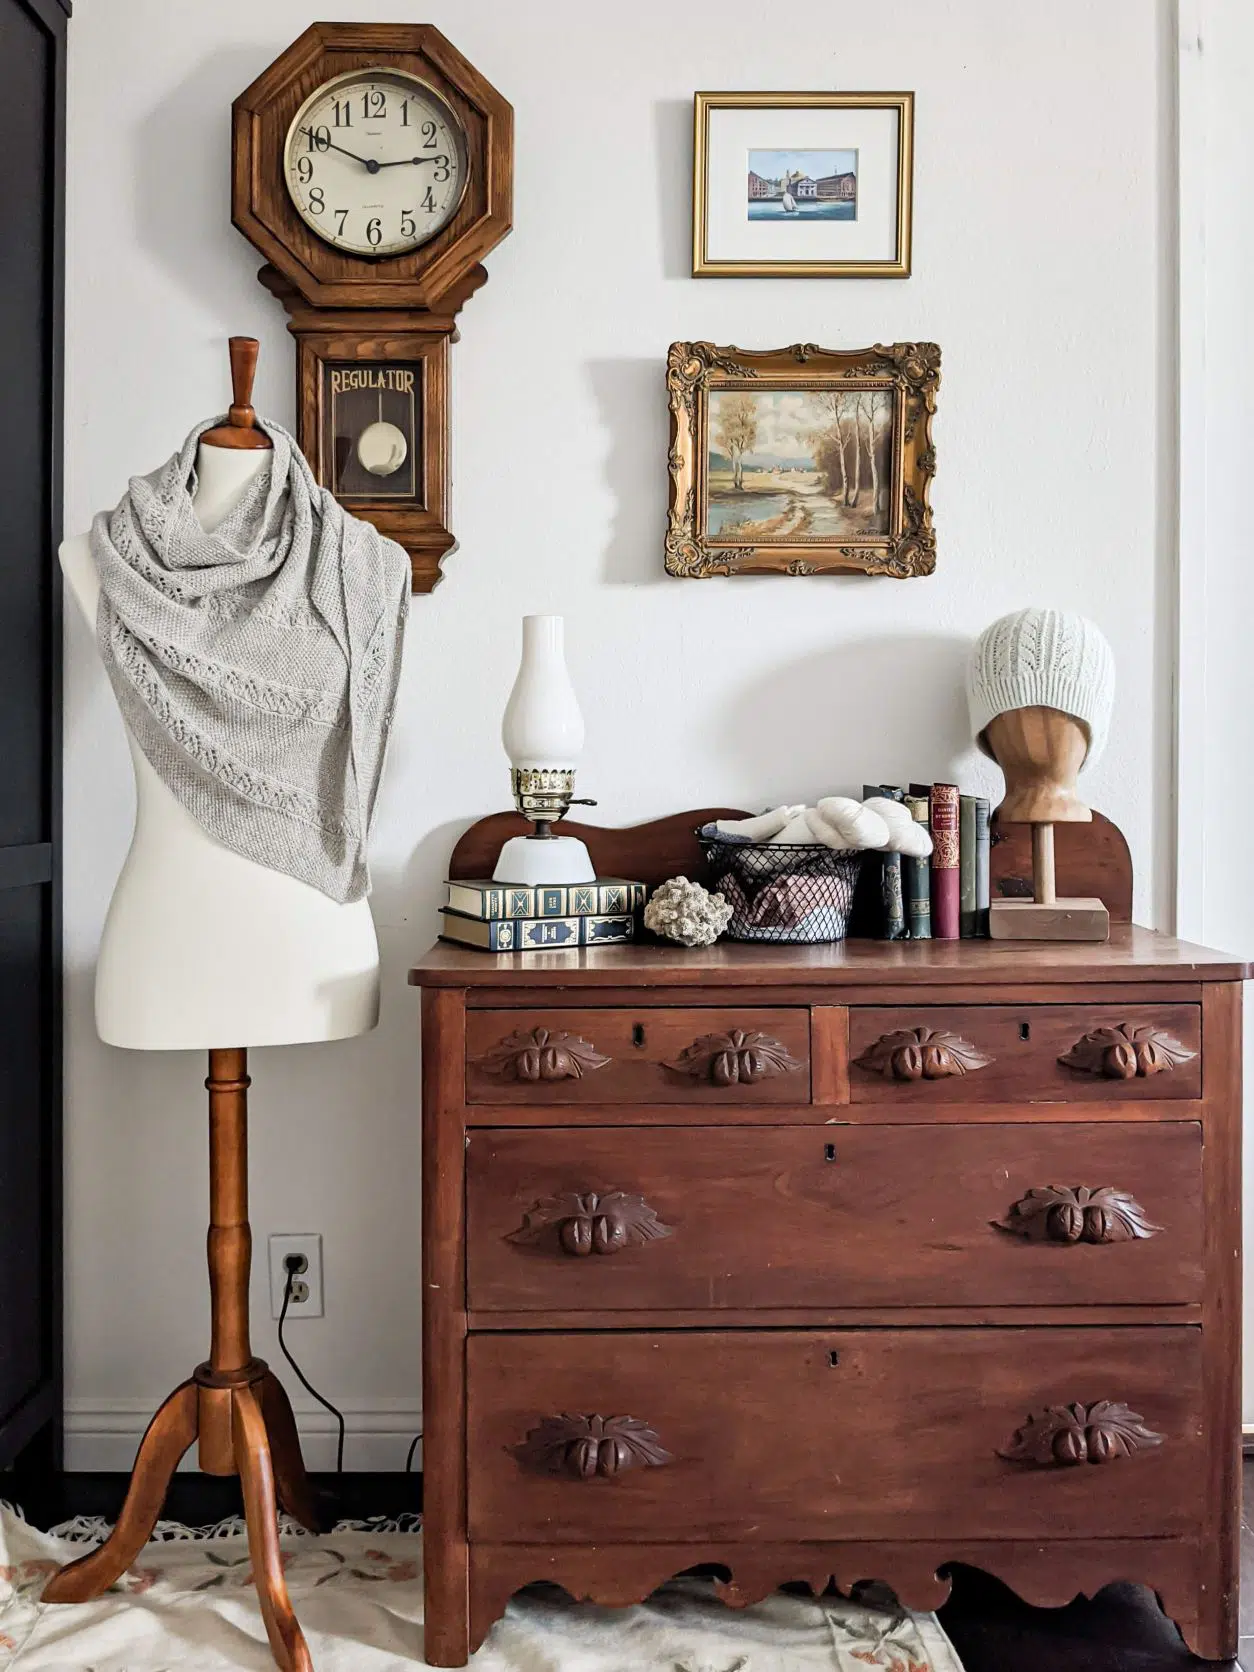 A small Eastlake dresser with carved handles sits next to a dressmaker's form with a gray shawl draped on it. Hung on the wall behind them are a wooden clock and two framed paintings. On top of the dresser are antique books, a lamp made to look like an oil lantern, a basket of yarn, and a wooden head form with a knit hat on it.